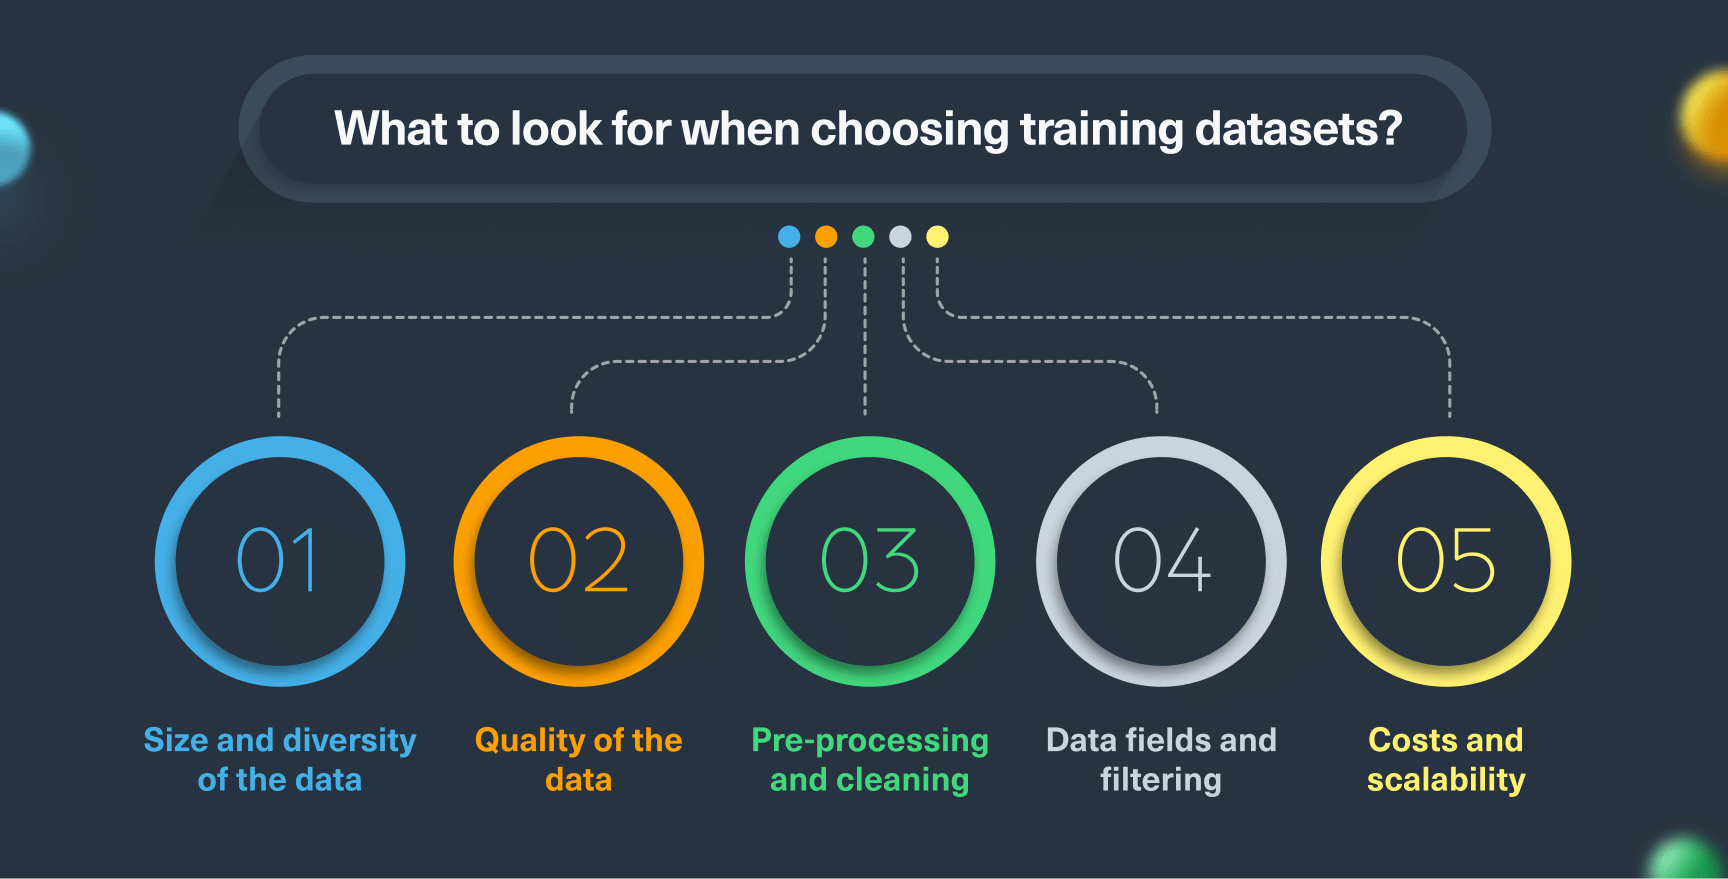 What to look for when choosing training datasets?